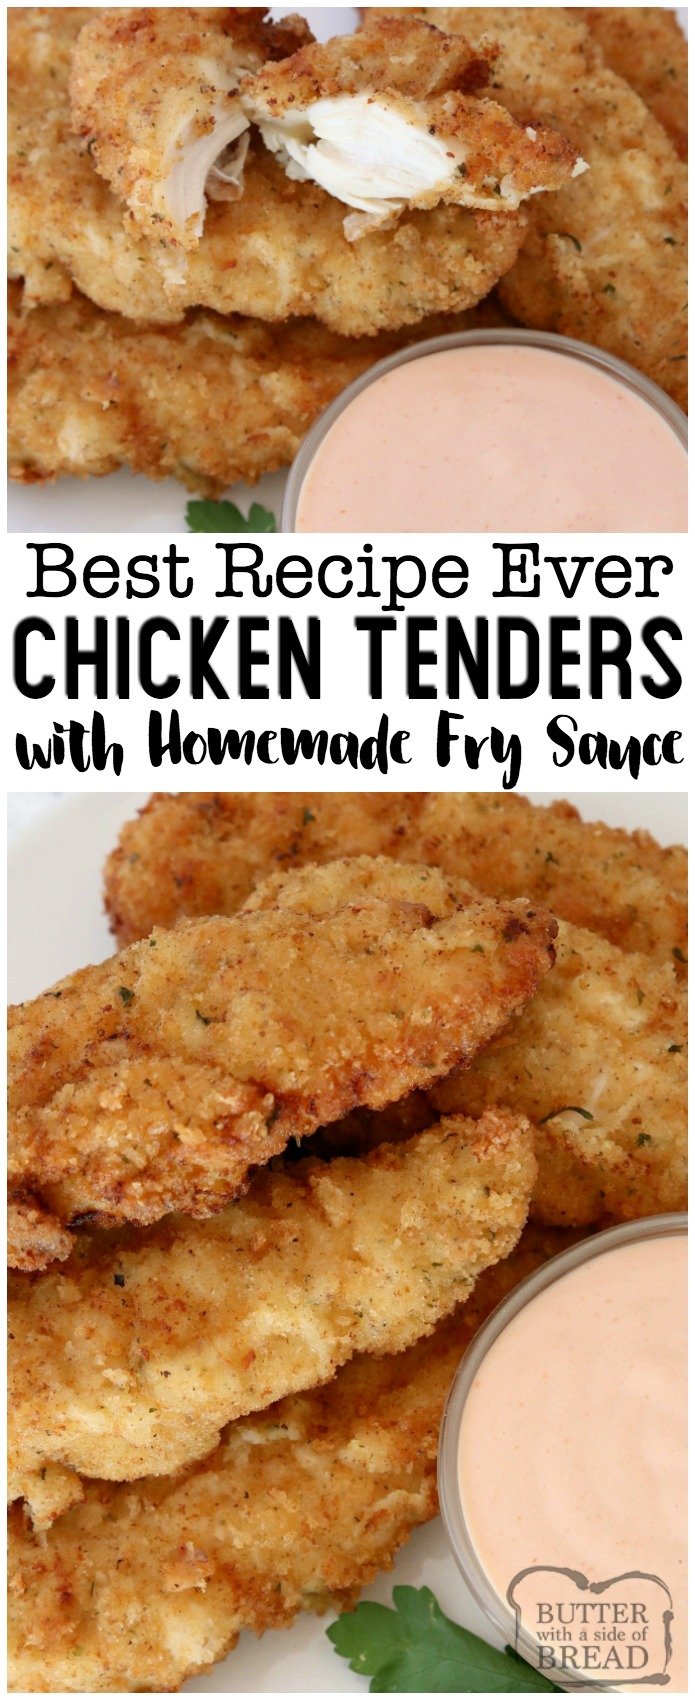 Chicken Strips made from scratch- so tender, juicy & flavorful. 2 simple tips to take your chicken tenders from good to great! #chicken #dinner #tenders #friedchicken #tenderize #food #meal #maindish #cooking #recipe from BUTTER WITH A SIDE OF BREAD